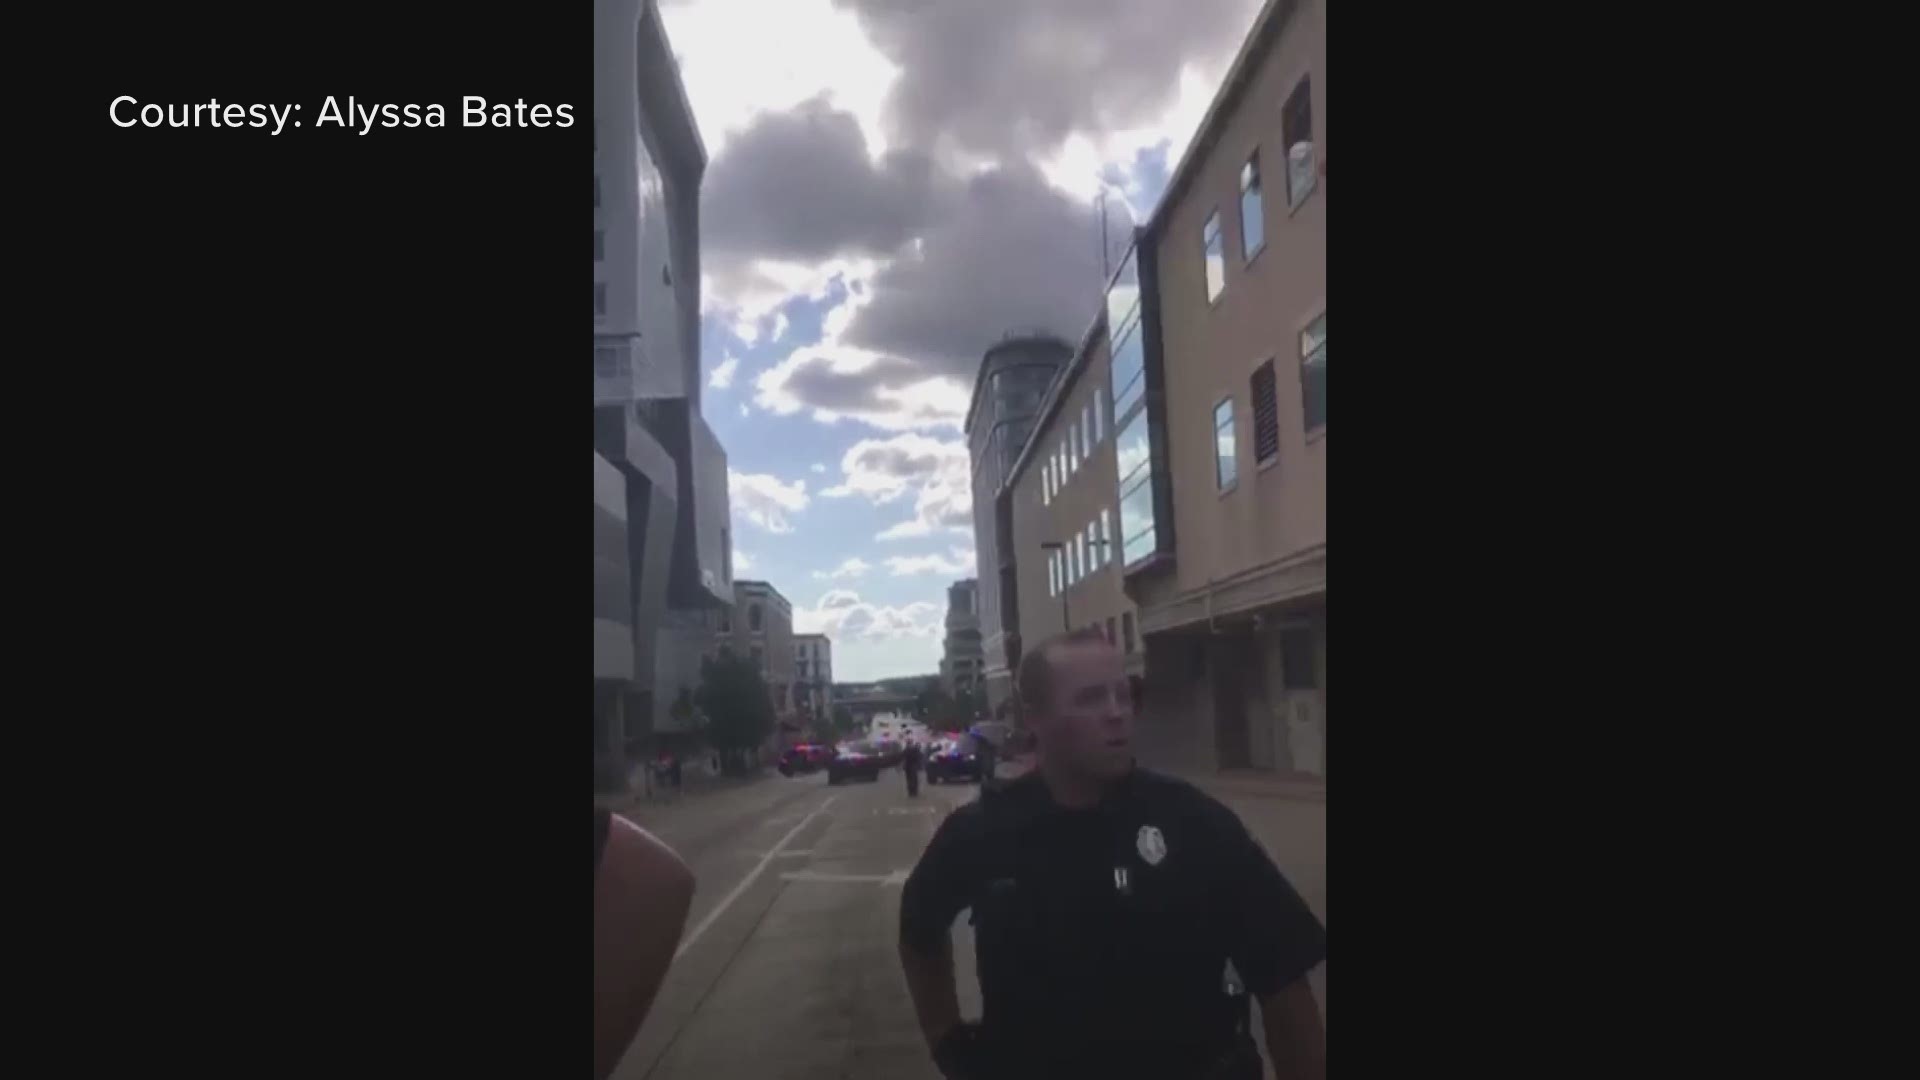 Alyssa Bates, founder of Justice for Black Lives, said she was pushed several times by a Grand Rapids Police officer.